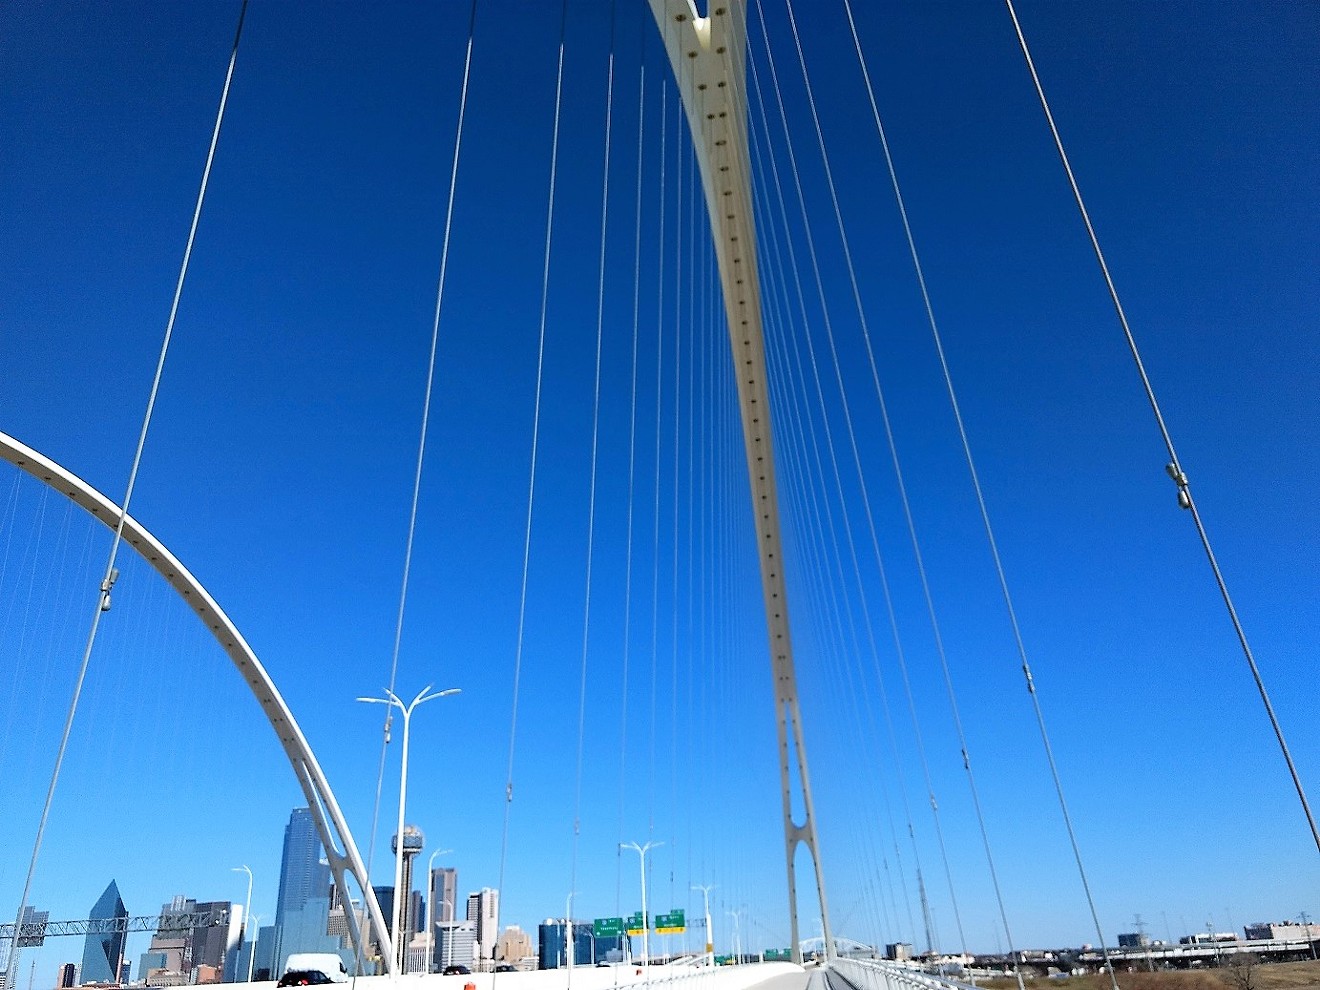 Cracked rods, cracked cable anchors. The Margaret McDermott Bridge is not doing well, and the part designed by Santiago Calatrava isn't even open yet.